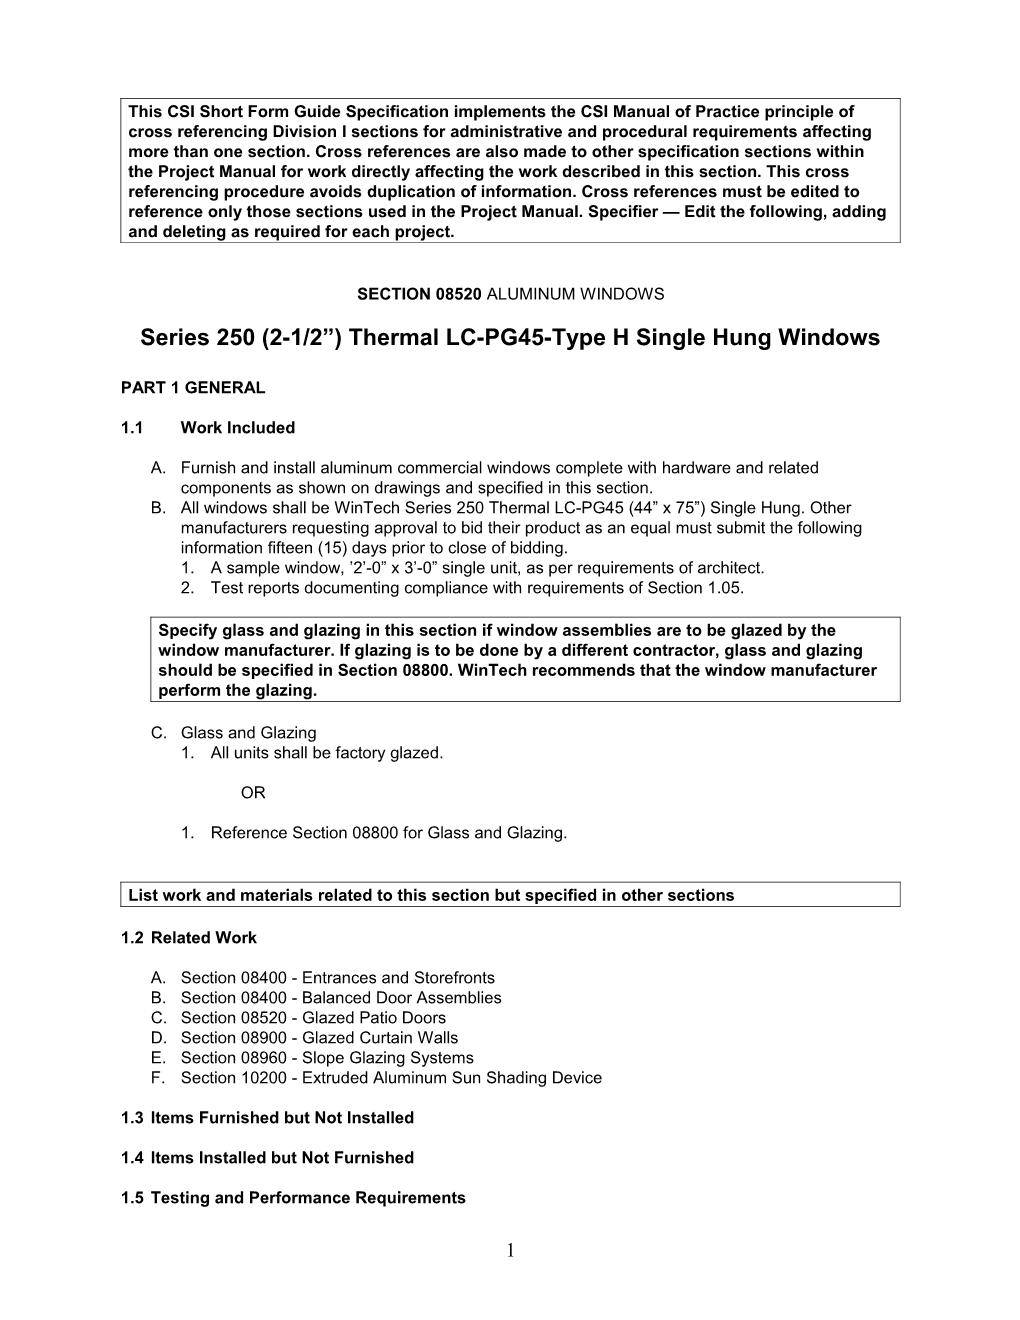 Series 250 (2-1/2 )Thermal LC-PG45-Type H Single Hung Windows